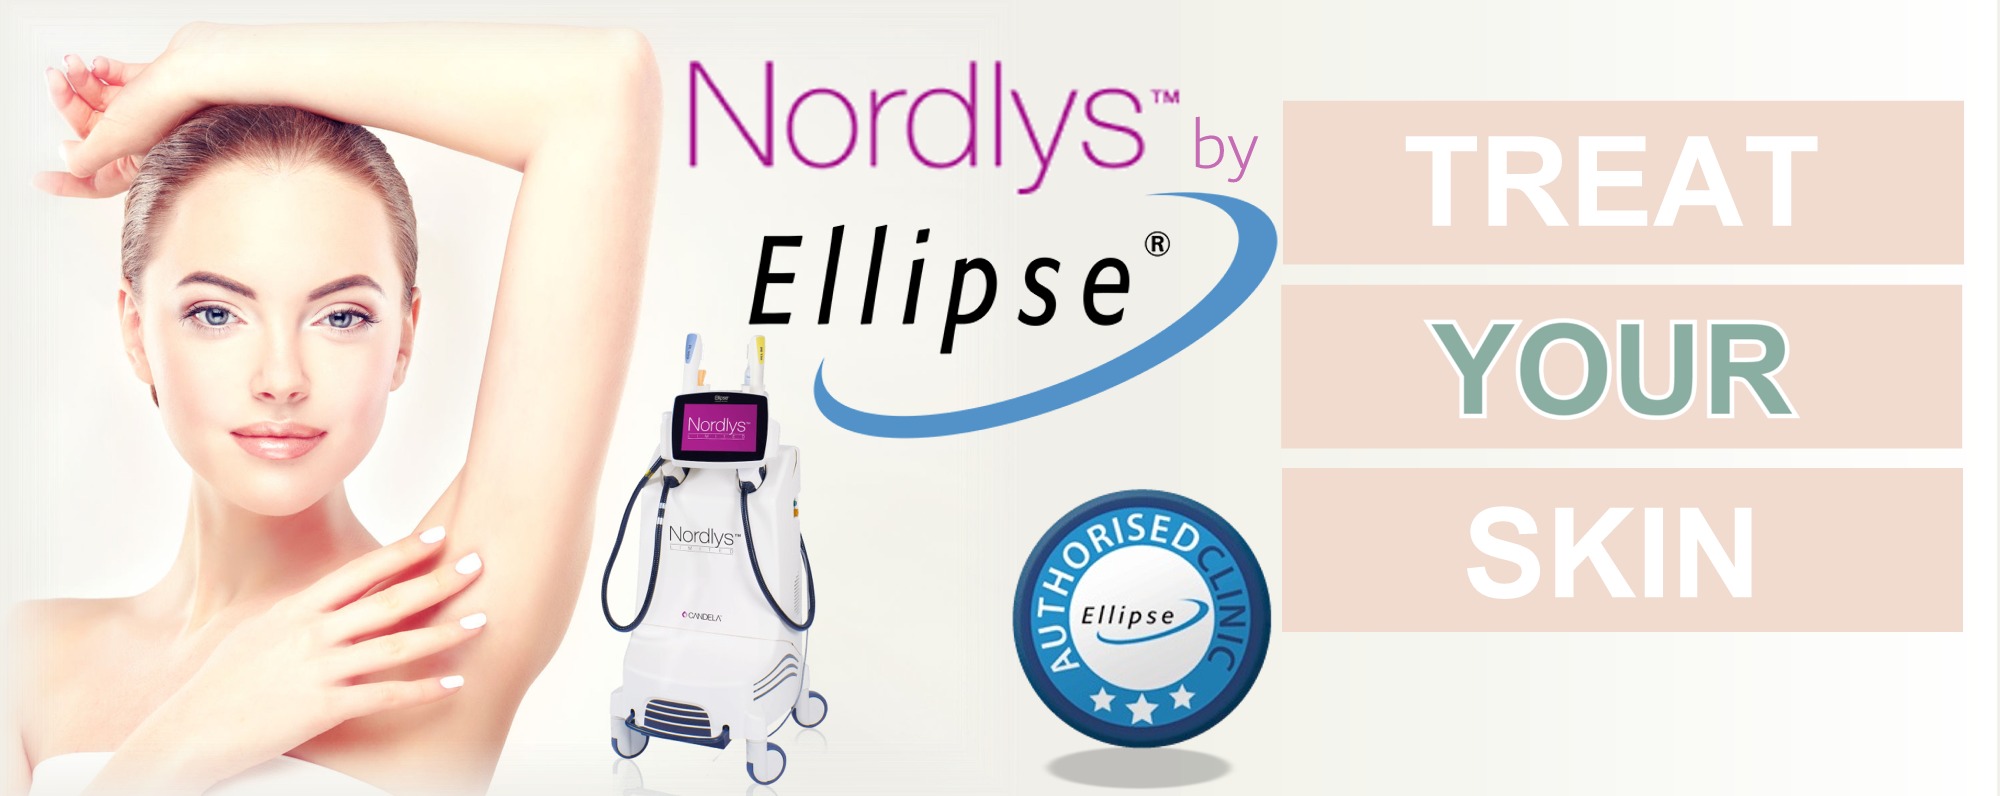 Nordlys by Ellipse - treat your skin at Catherine's Laser & Beauty Salon, Letterkenny, County Donegal, Ireland